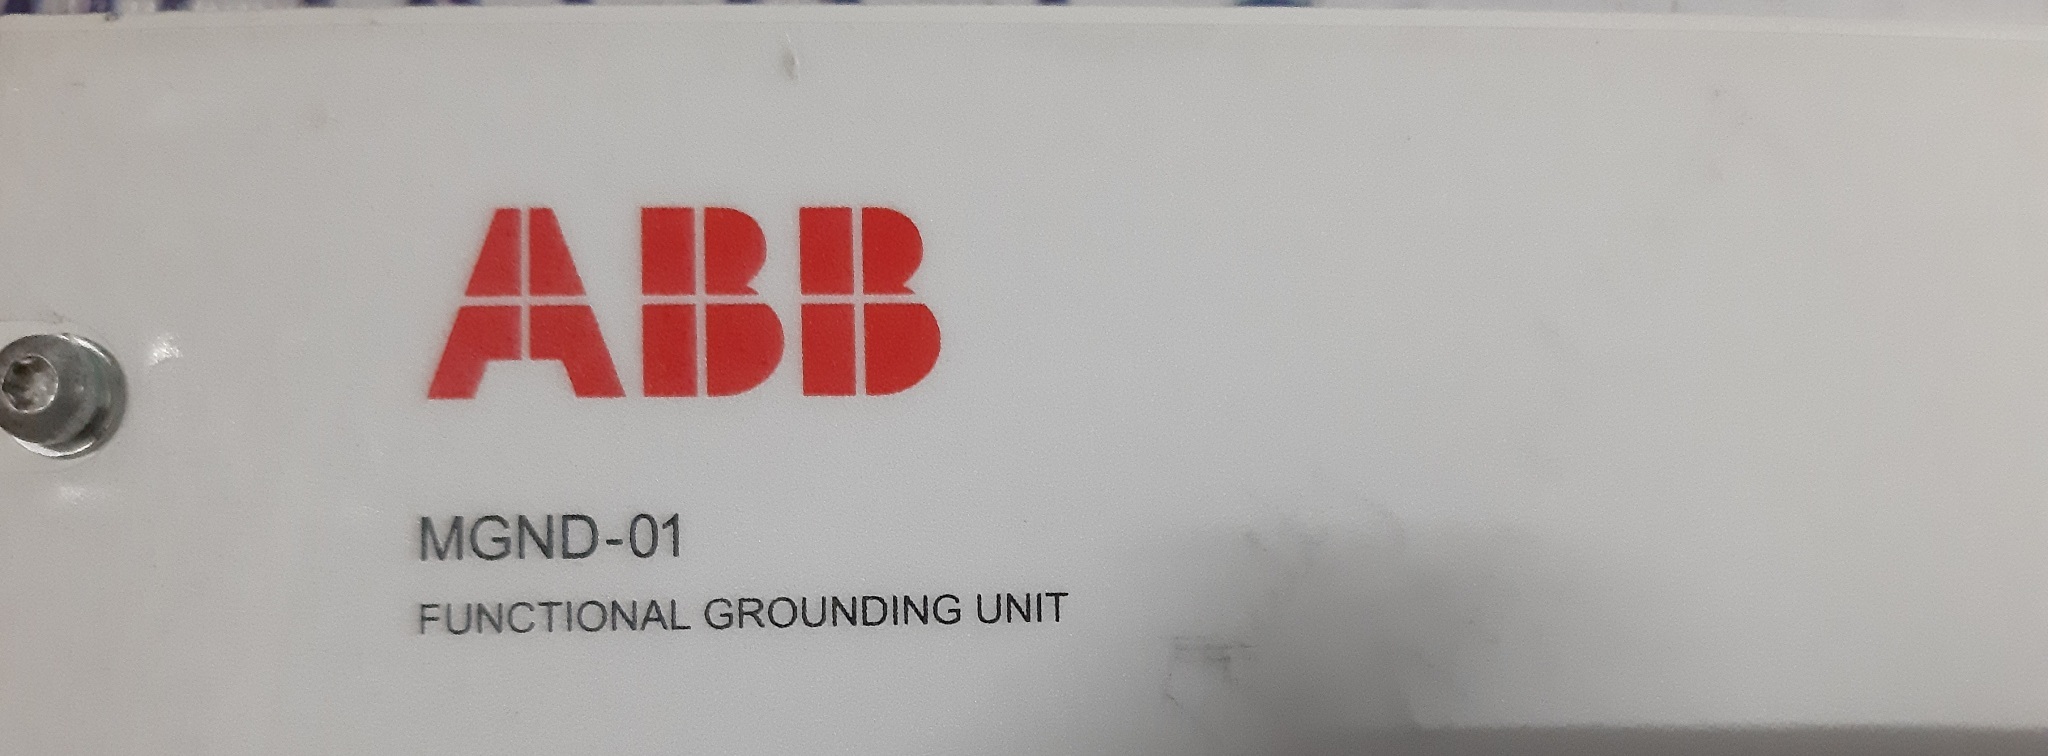 ABB FUNCTIONAL GROUNDING UNIT MGND-01